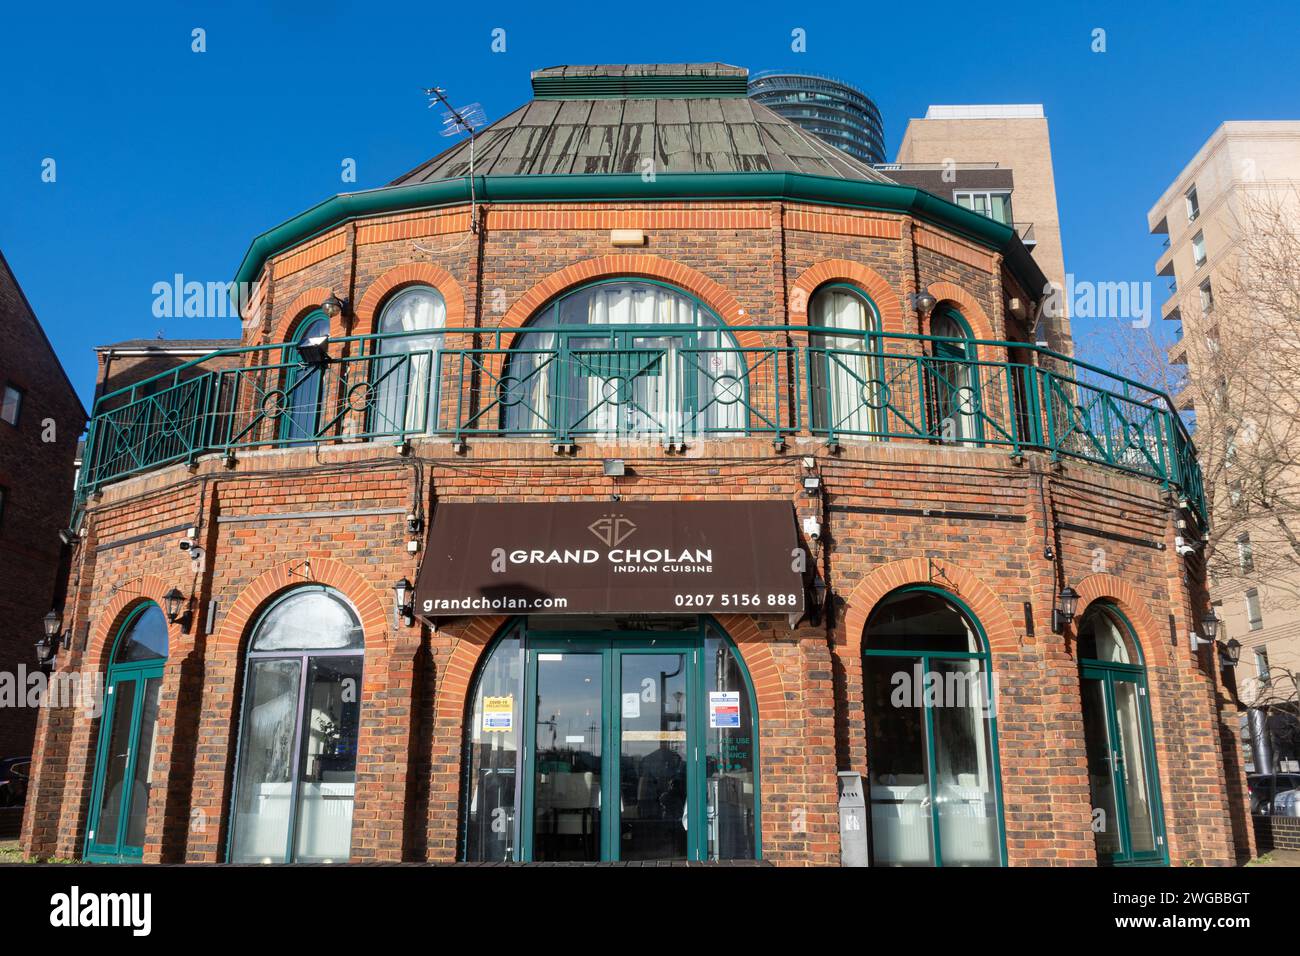 Grand Cholan Indian Cuisine Restaurant on the Isle of Dogs, London Docklands area, England, UK Stock Photo